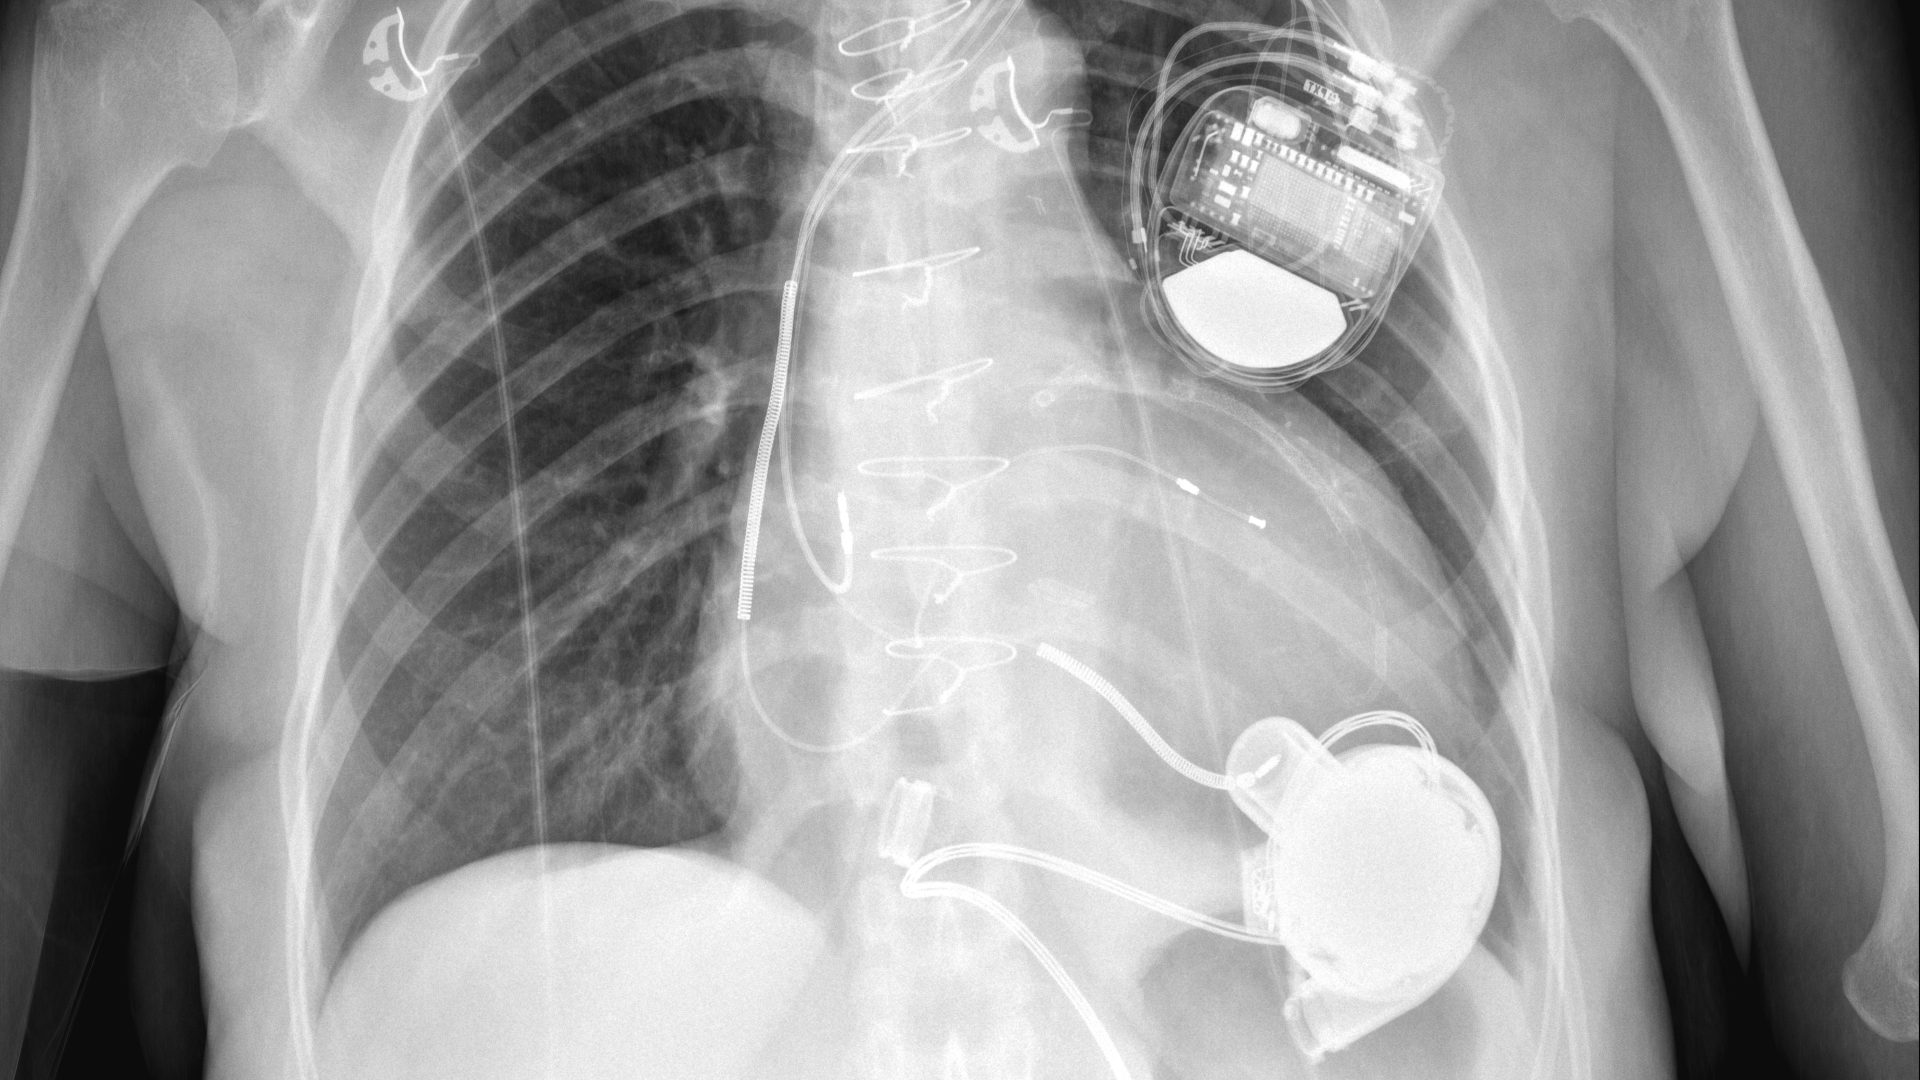 Chest X-ray showing the placement of a HeartWare device.